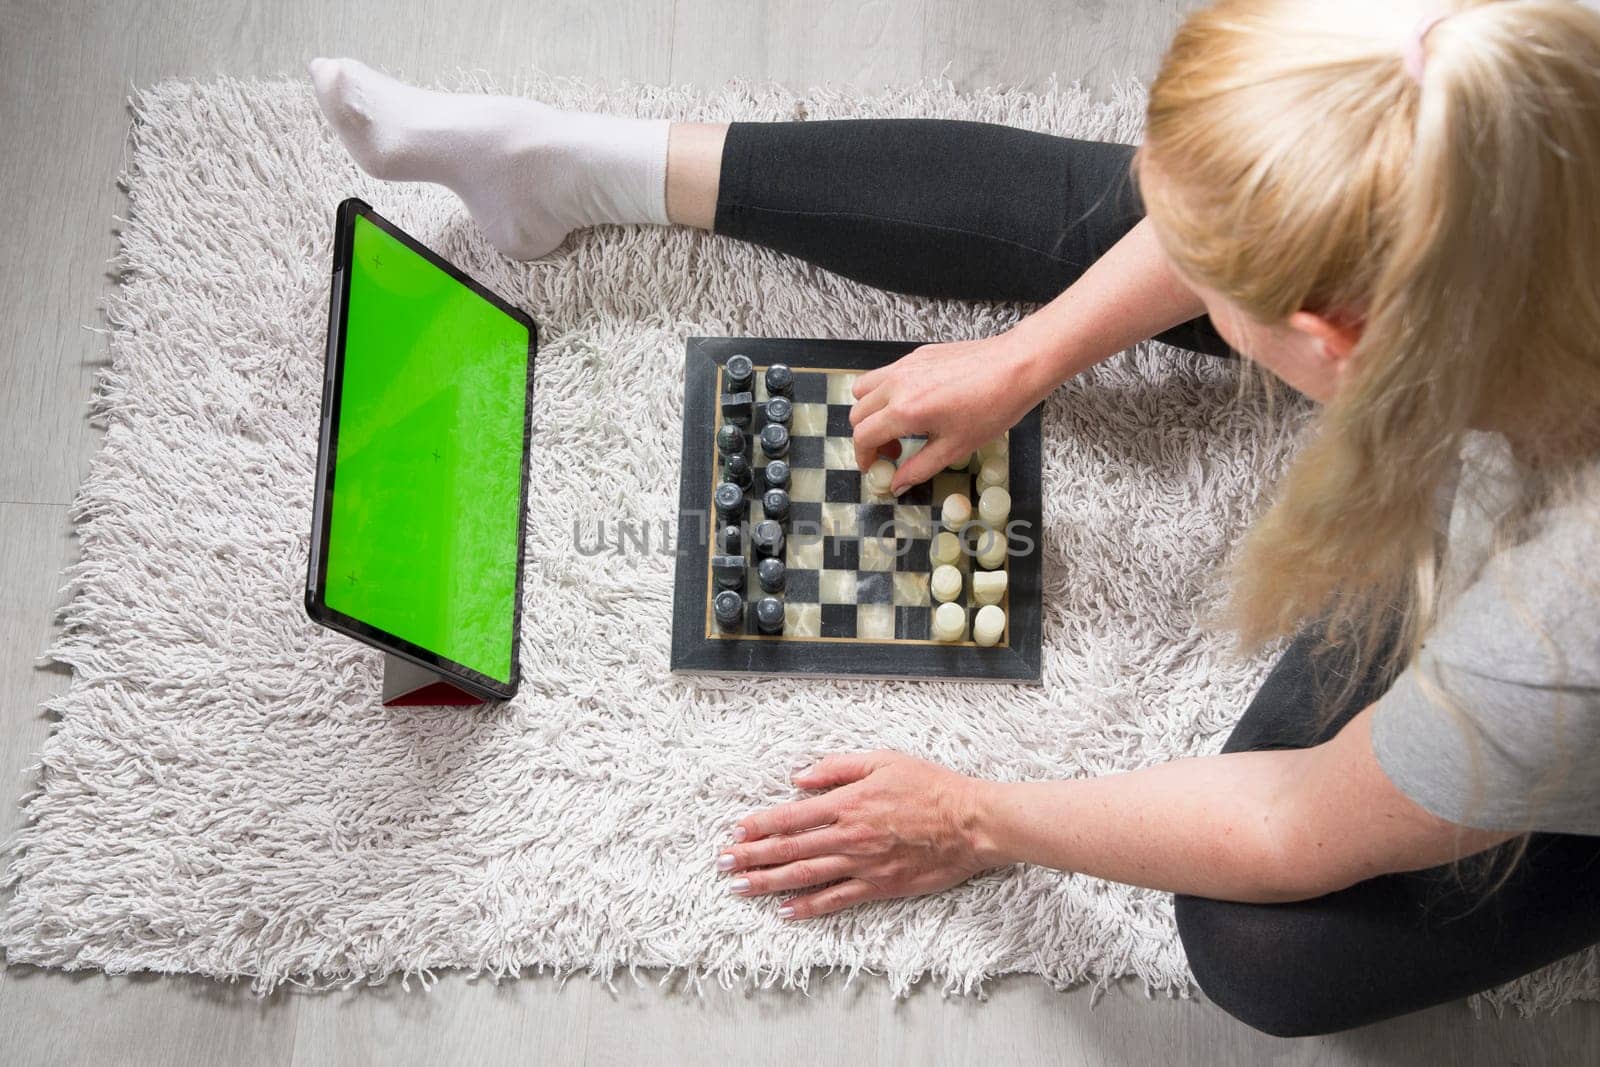 woman playing chess on the carpet with a virtual partner on a tablet, green screen tablet, mockup for app advertising by KaterinaDalemans